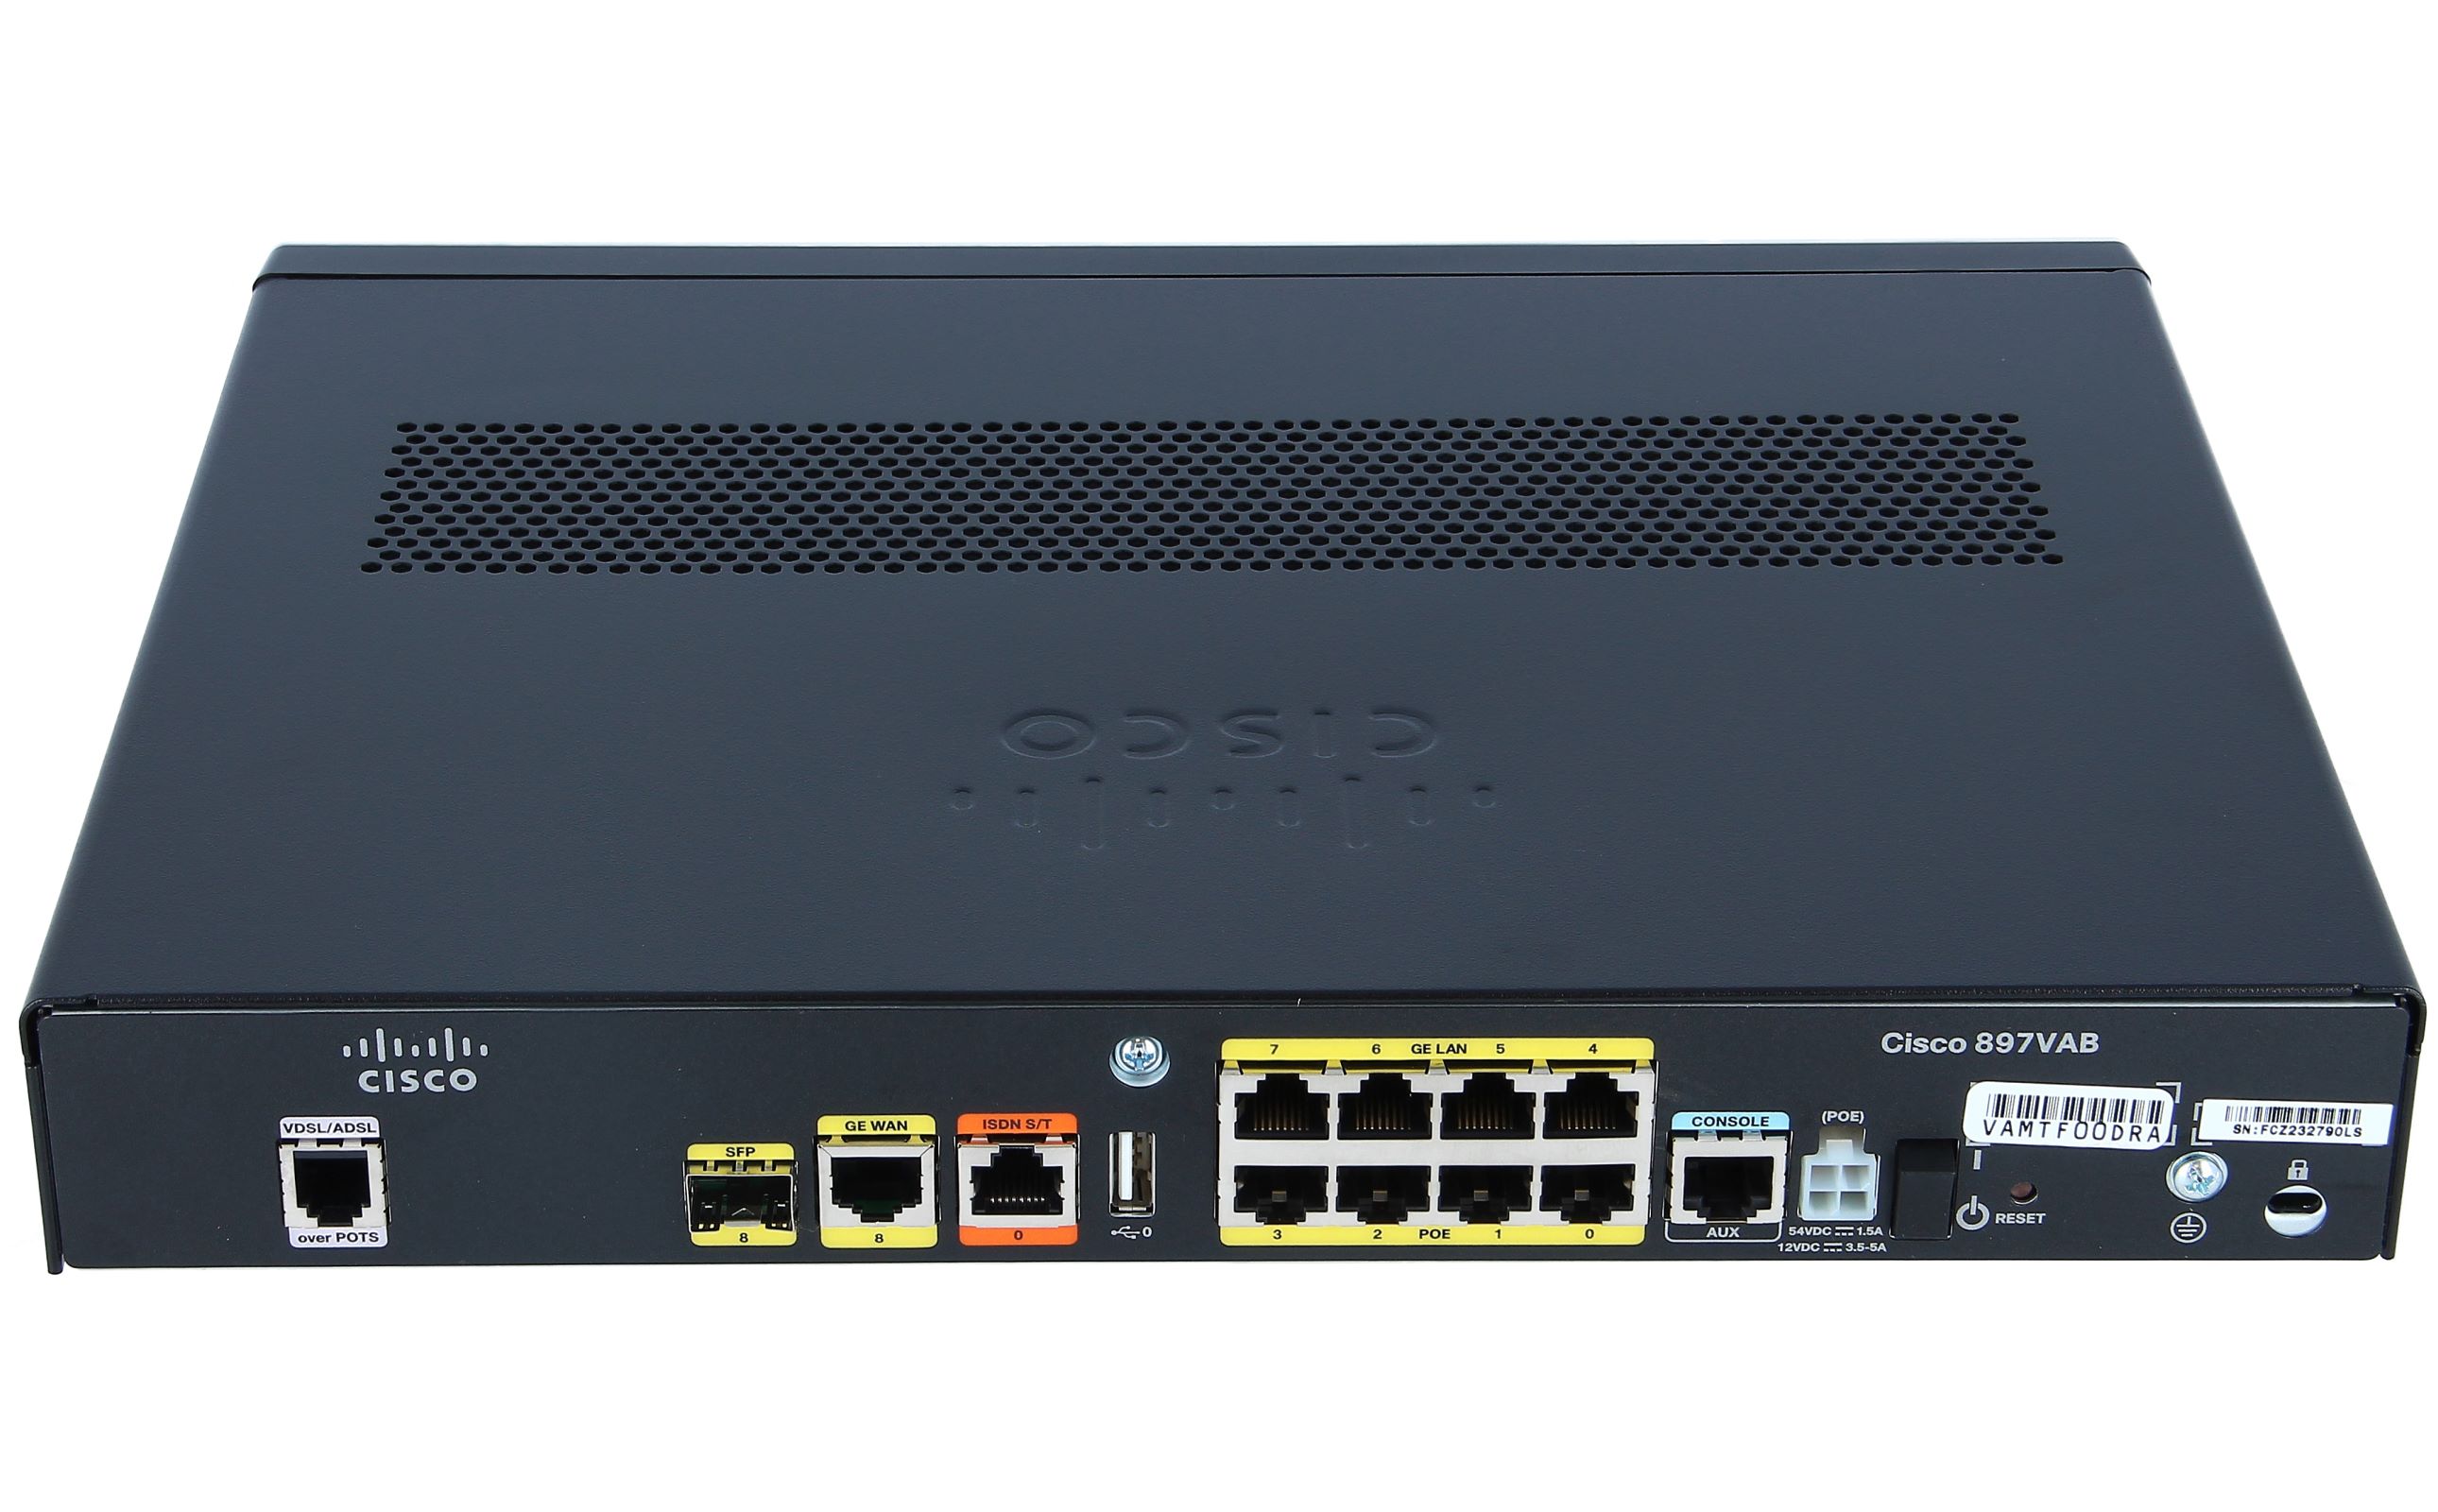 Cisco - C897VAB-K9 - 897VA Gigabit Ethernet Security Router with SFP and Bonding over POTS - Router - 1.000 Mbps - 8-Port new and buy online low prices